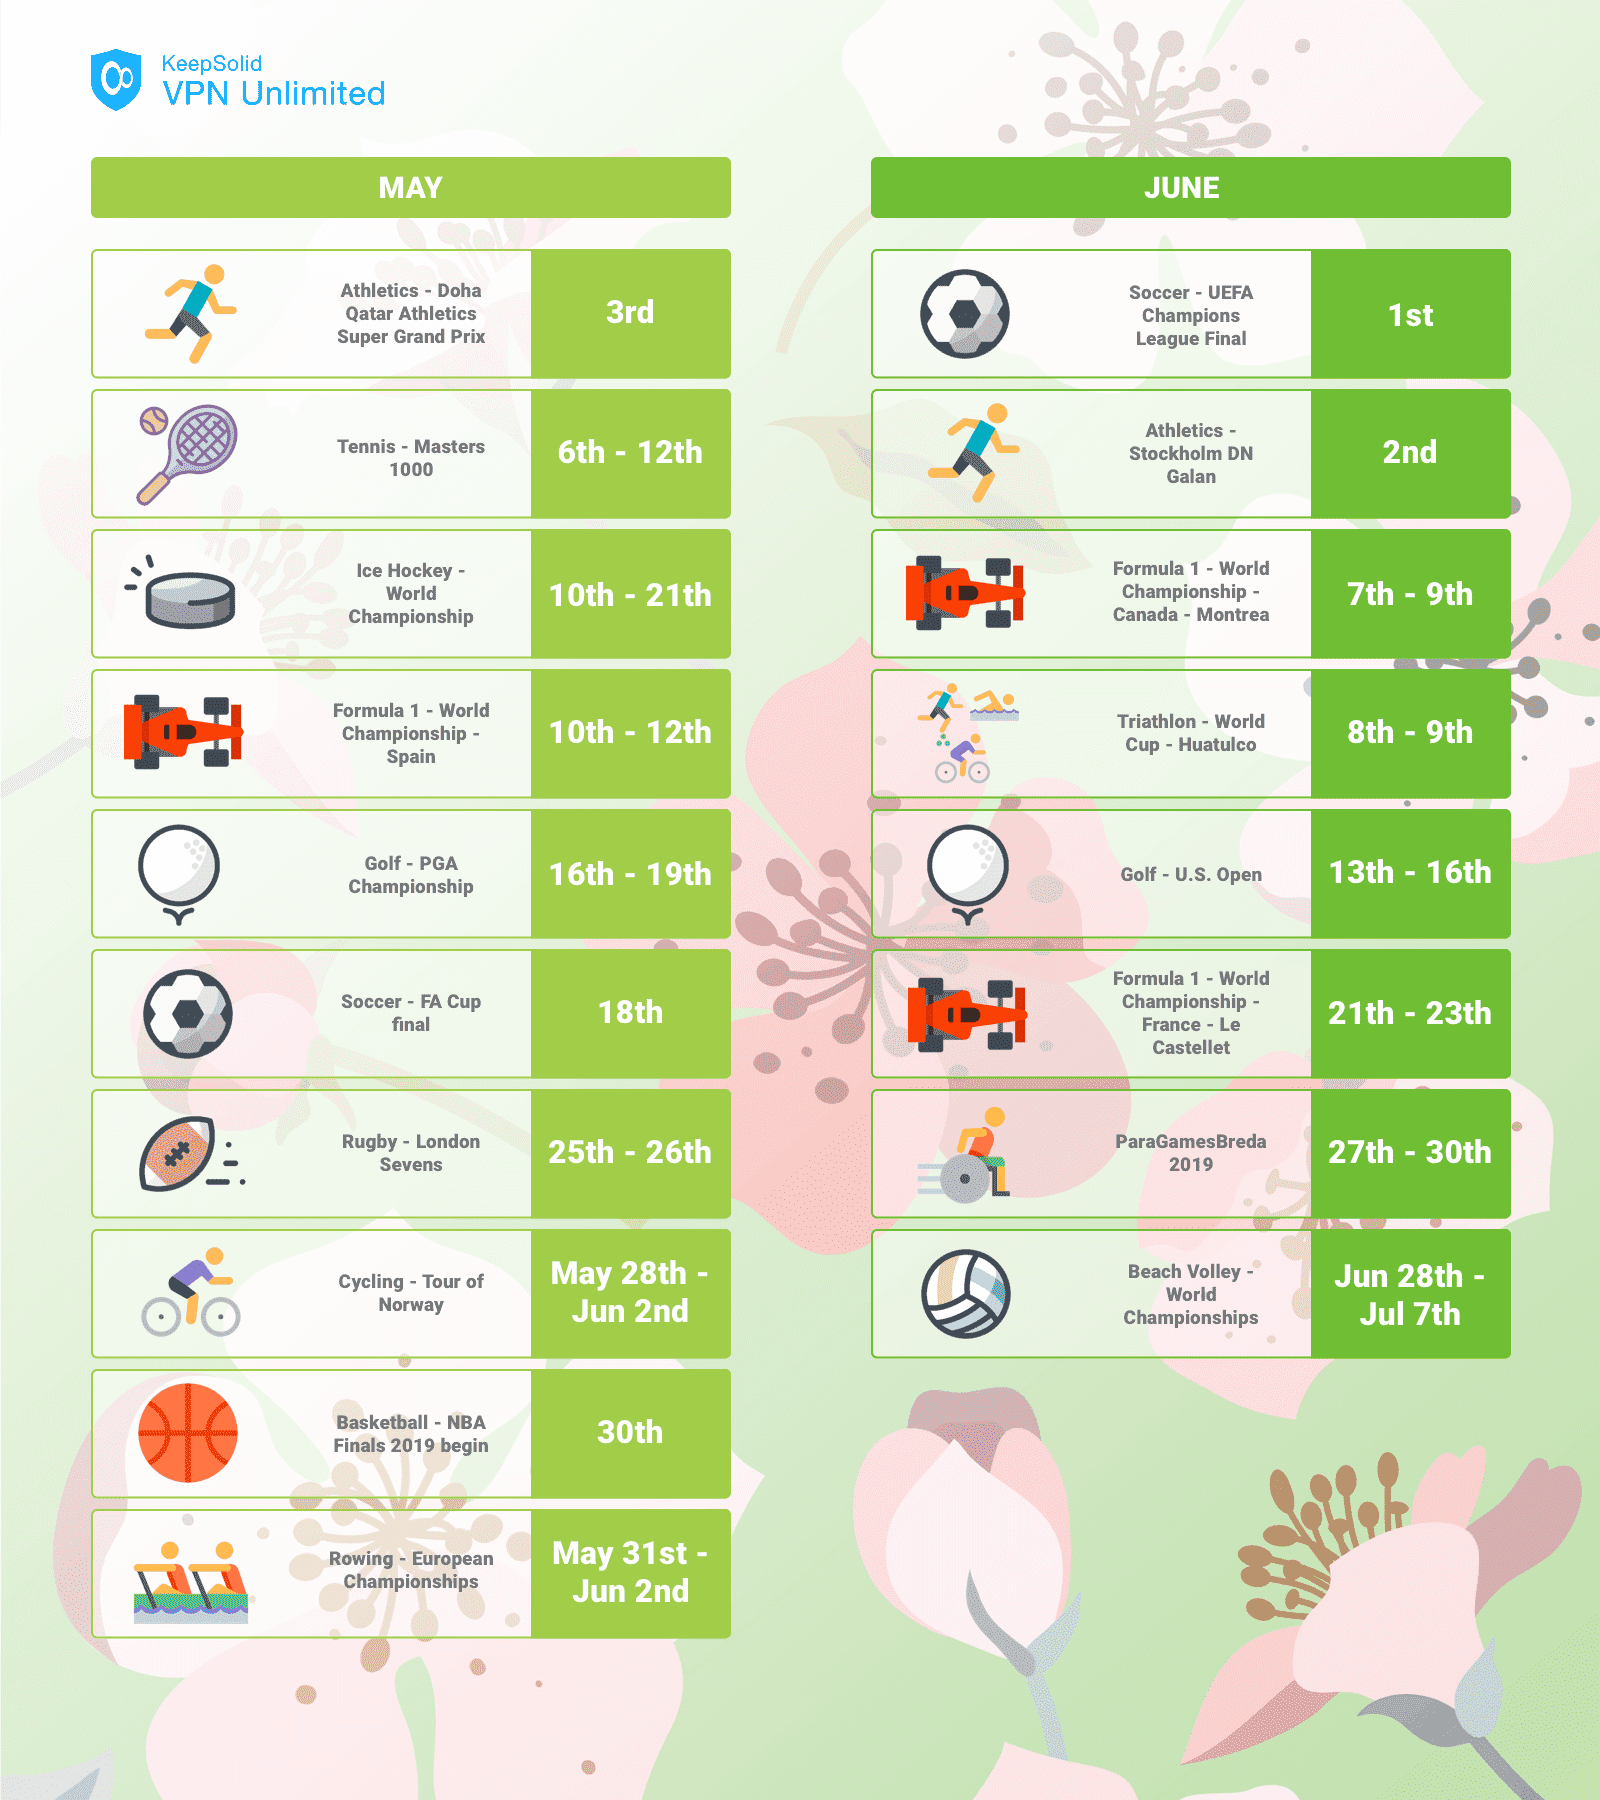 Upcoming international sports events in May - June 2019